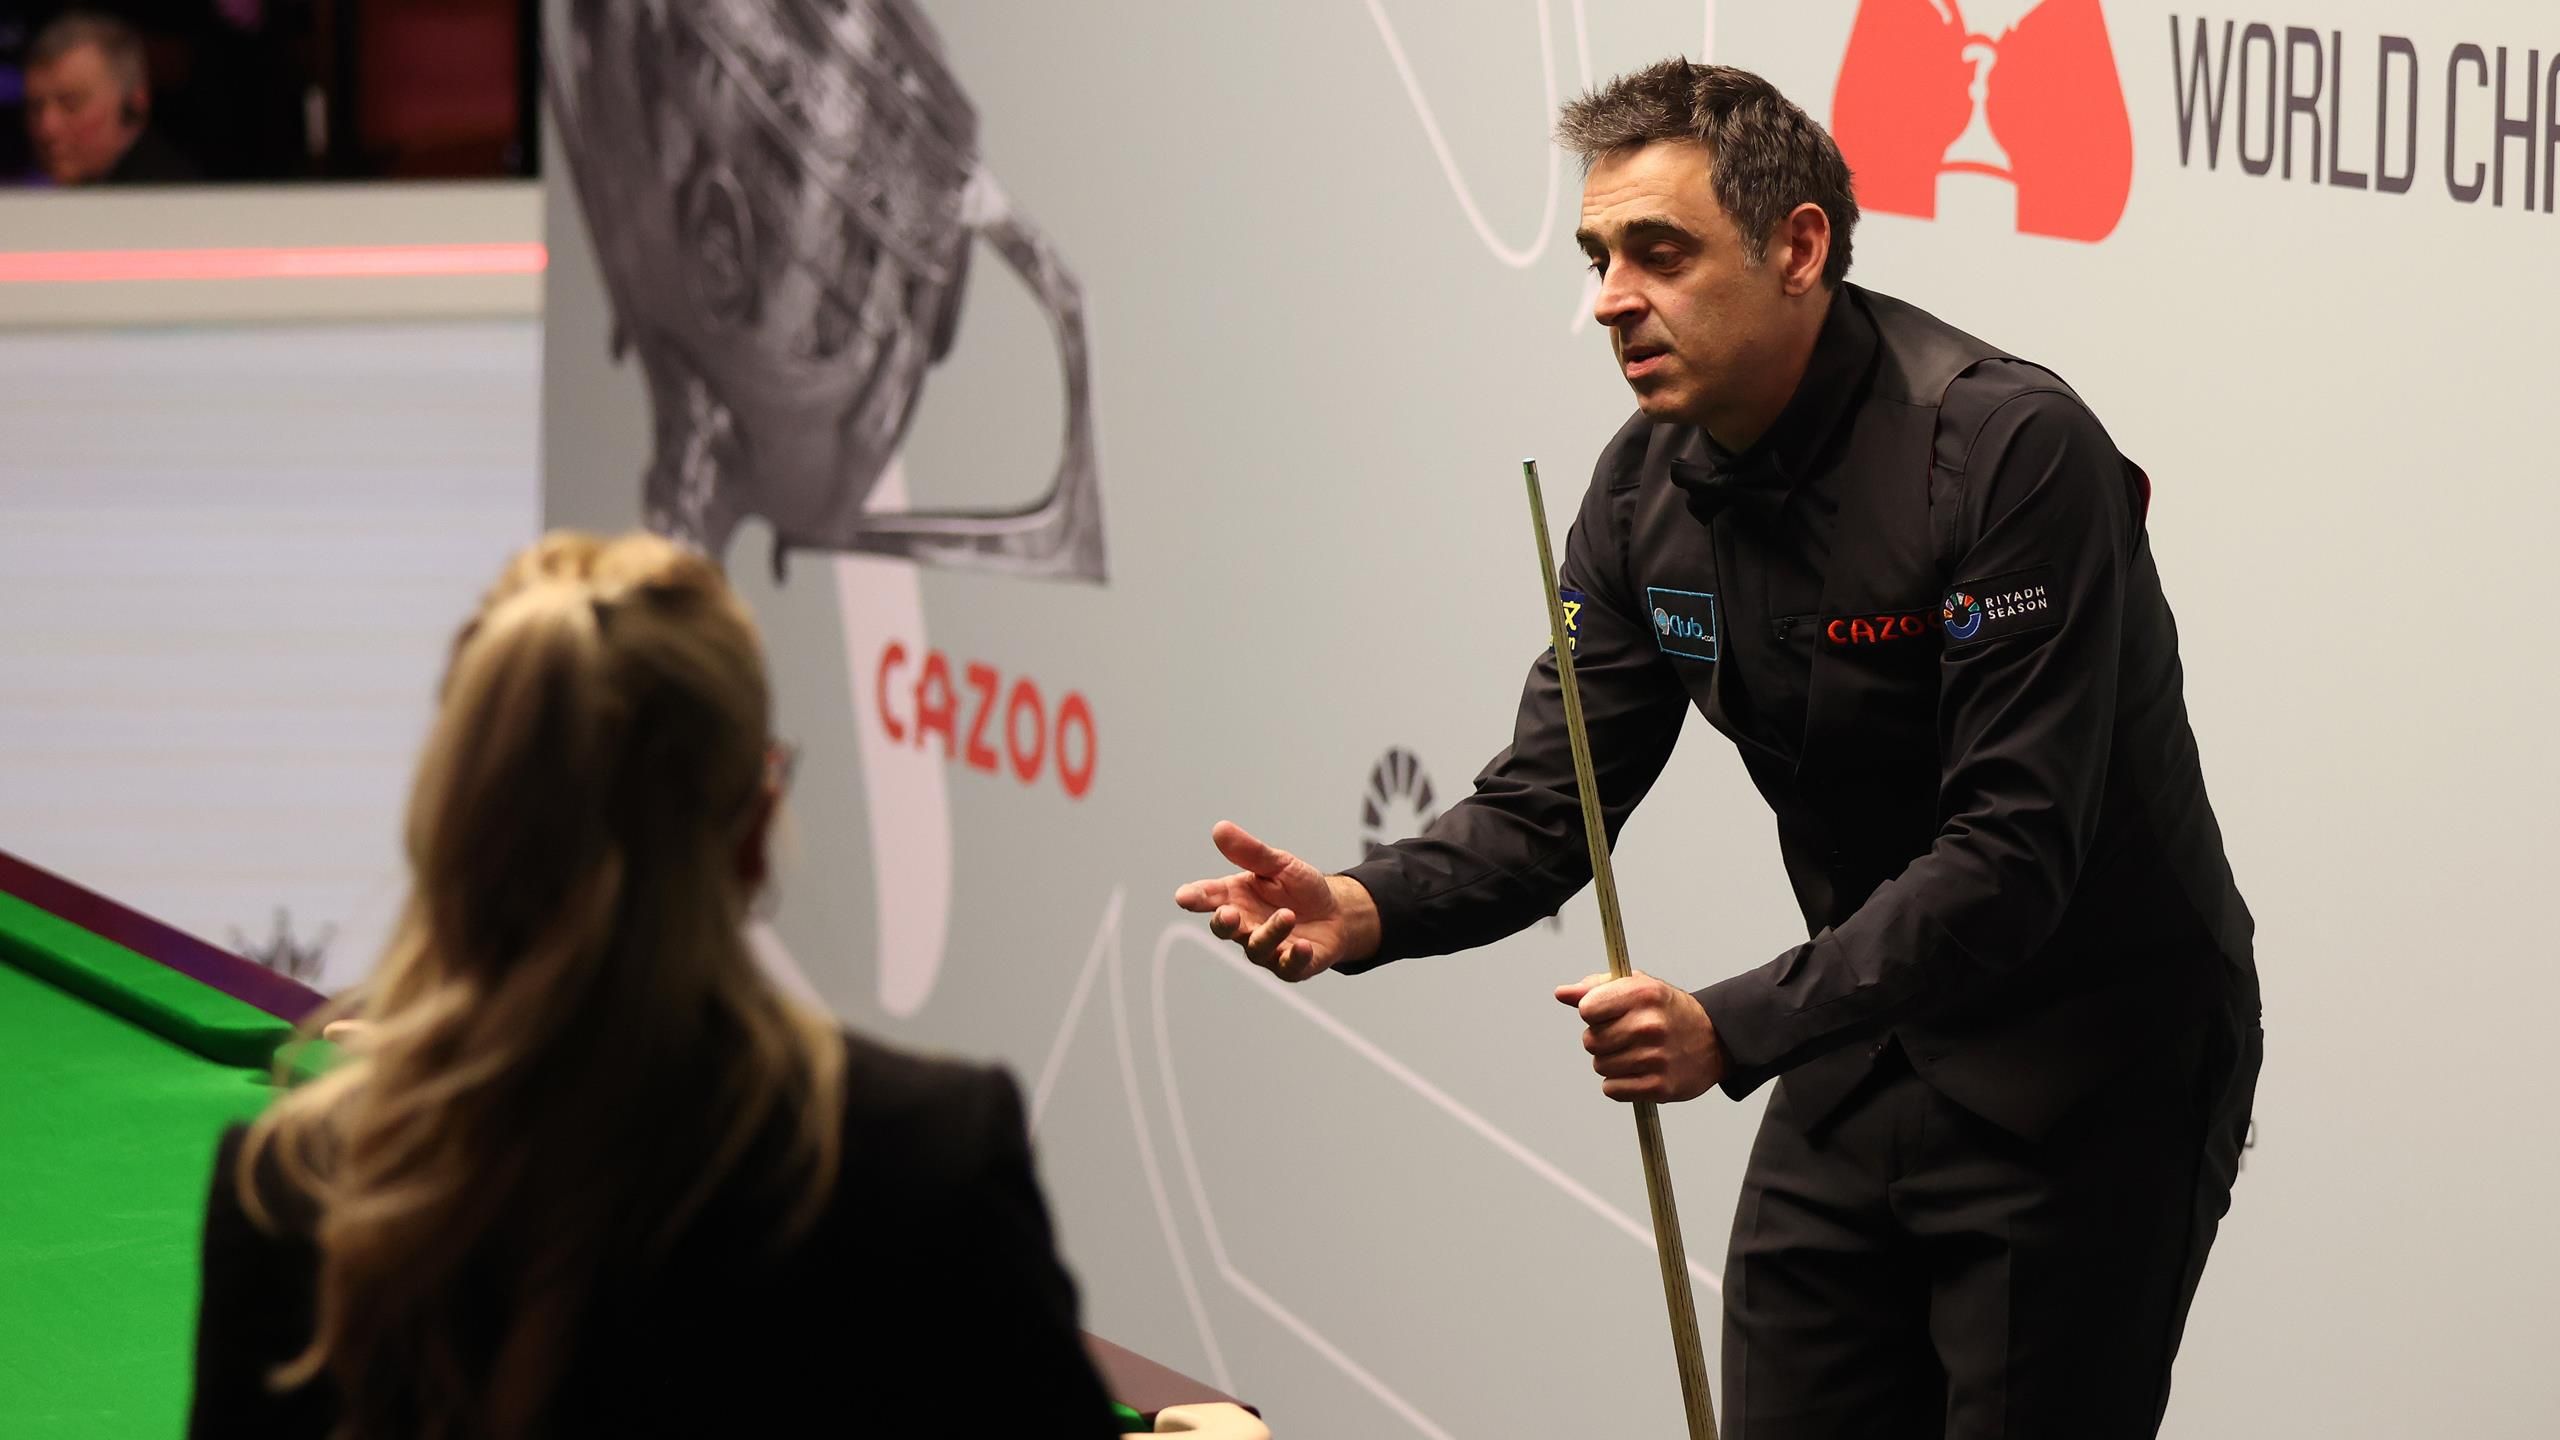 Ronnie O'Sullivan praised after black-spot drama - 'One of the greatest bits of sportsmanship I've ever seen'